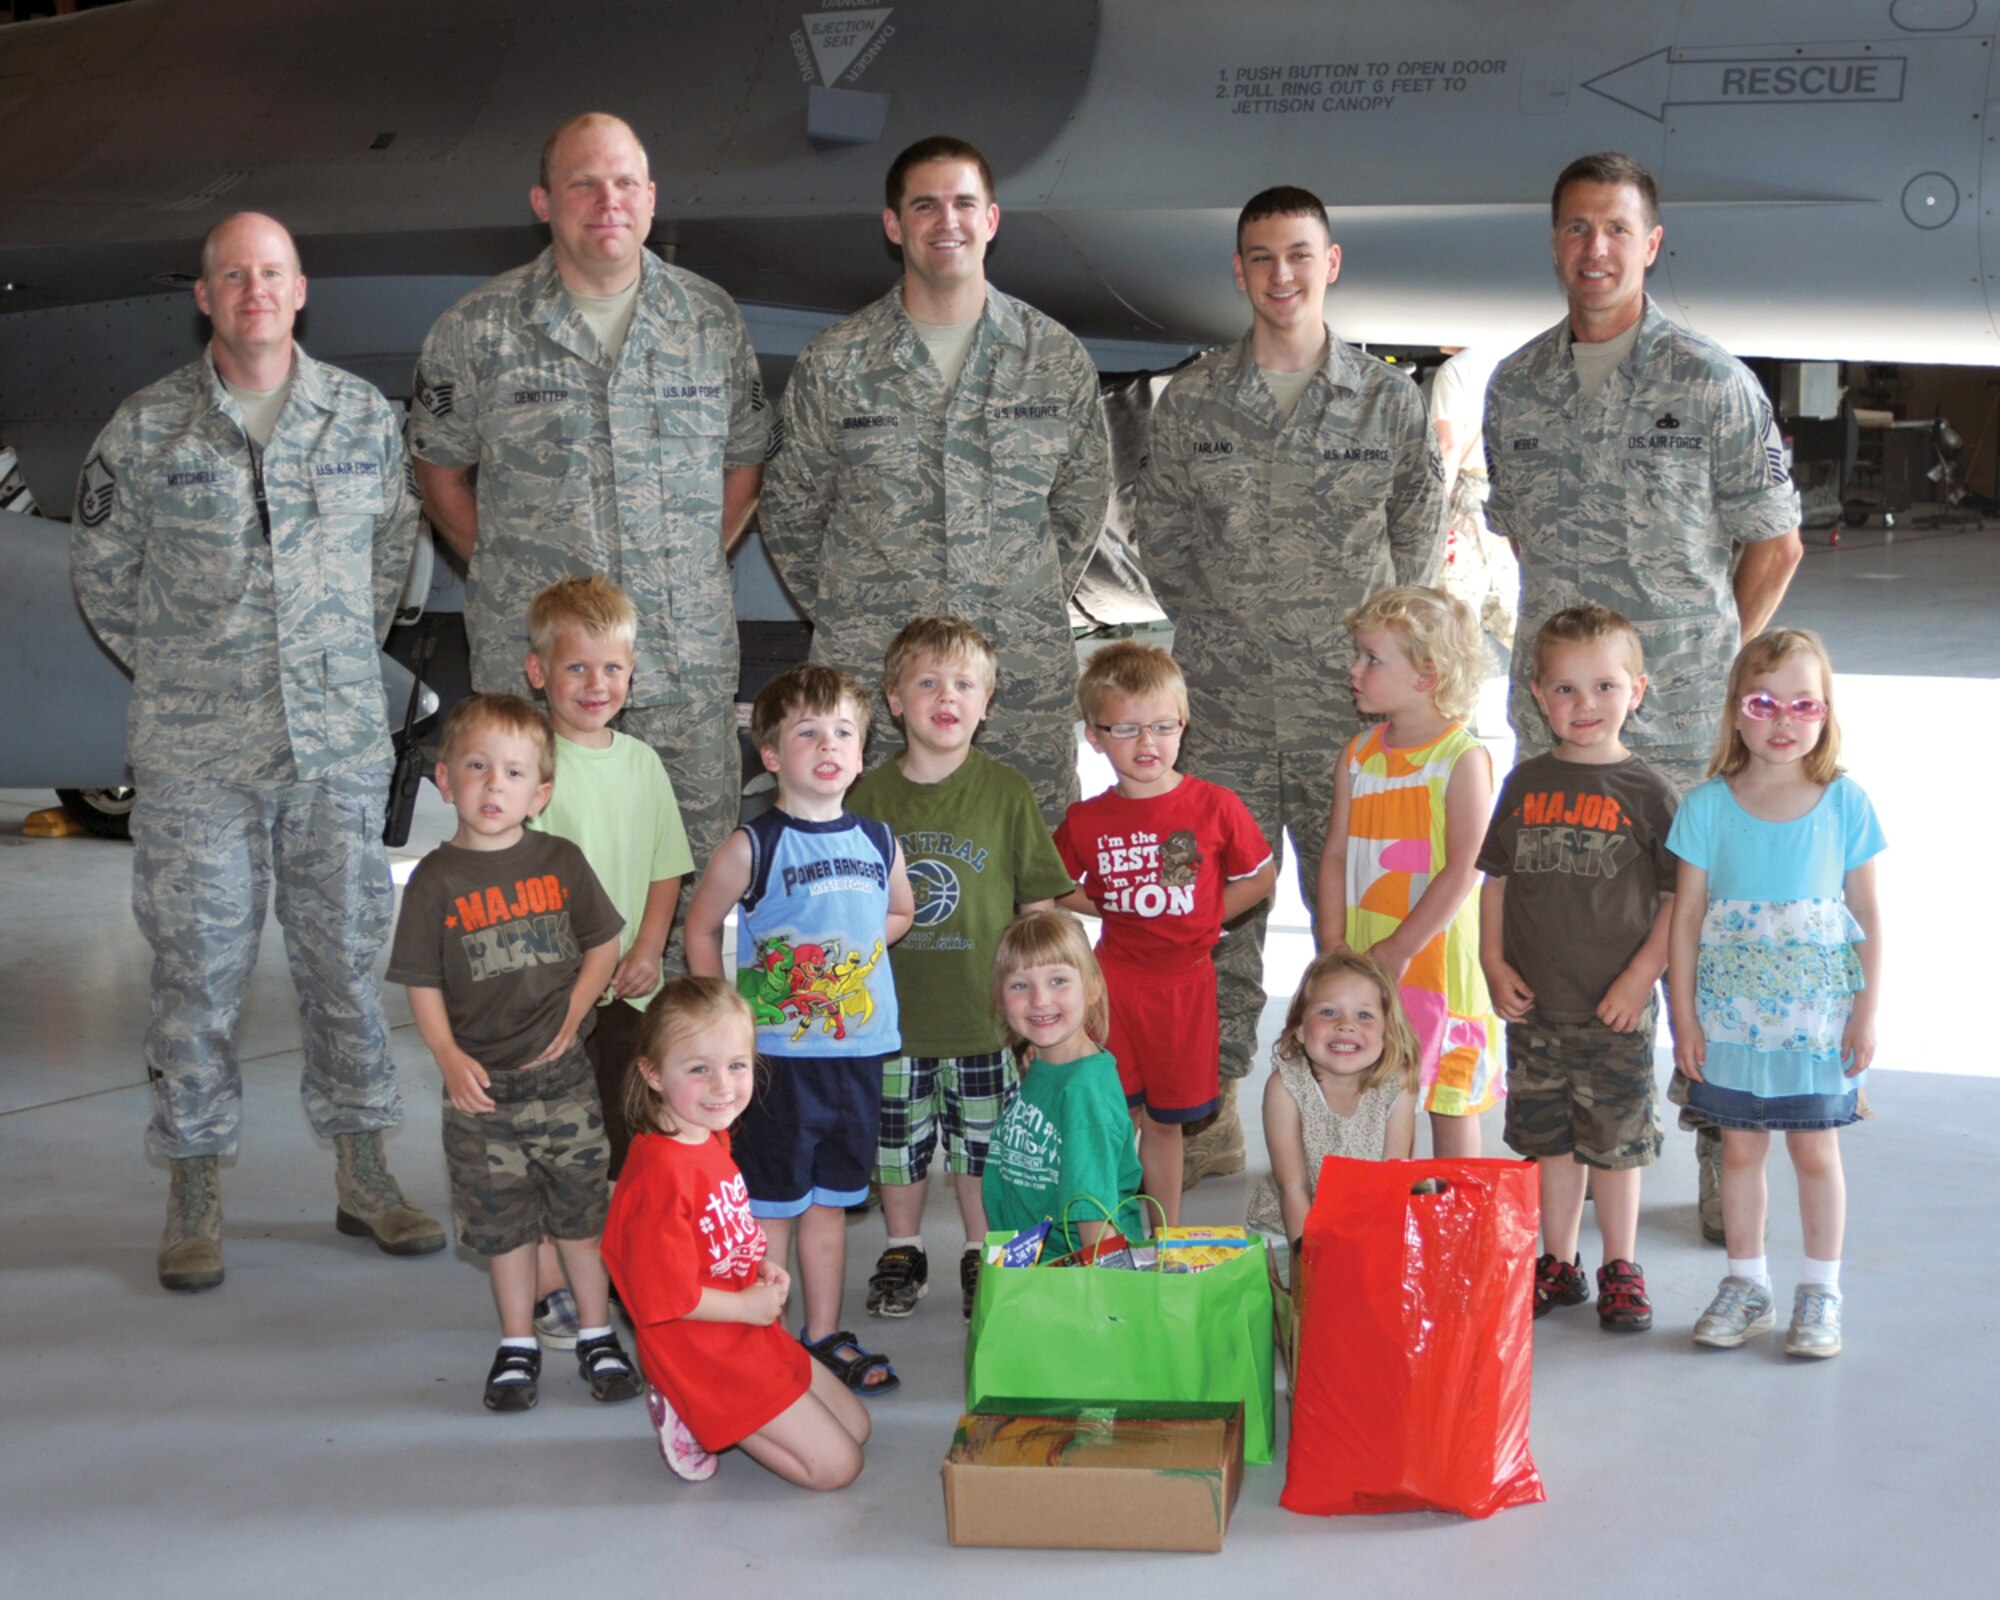 Members of the South Dakota Air National Guard are photographed with children from the Open Arms Christian Child Care Center at Joe Foss Field June 7.  The children visited the base to distribute care package they put together for the deployed members of the unit.  (Air Force photo by Master Sgt. Nancy Ausland)(RELEASED)